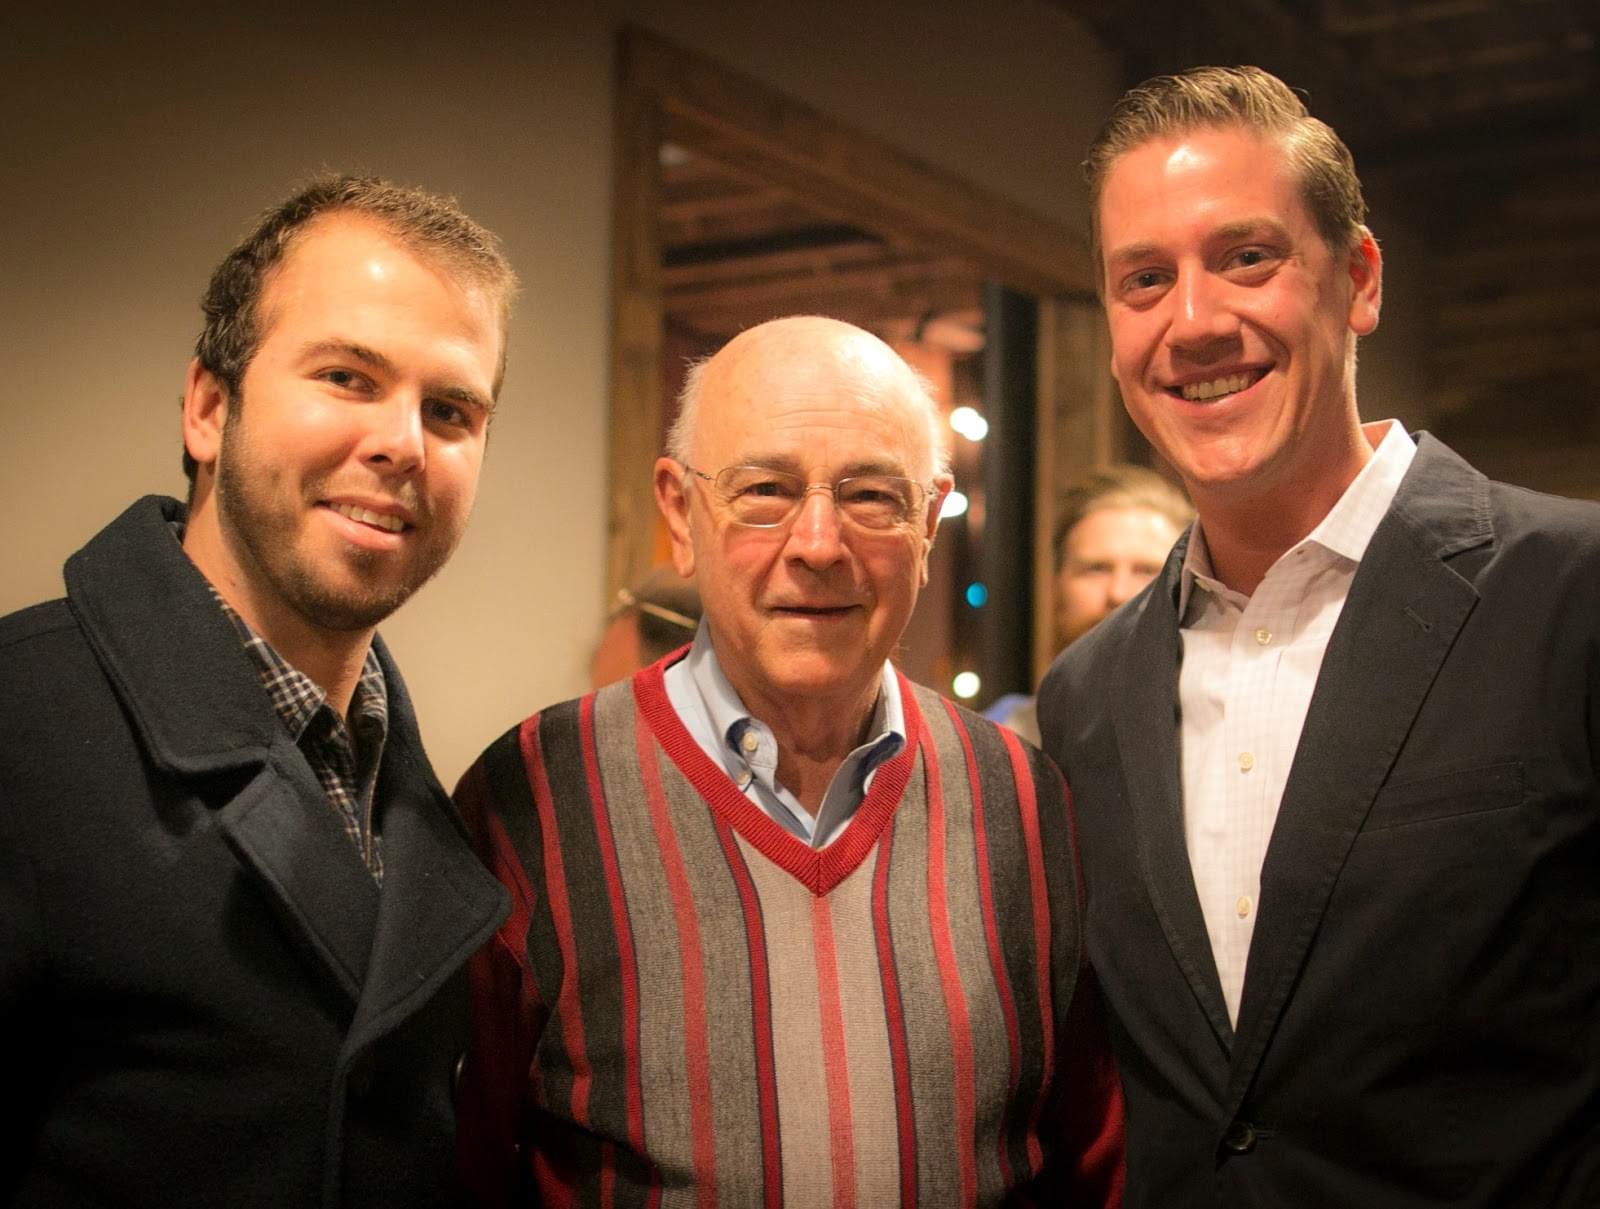 Caleb, Ron Fink (SCORE), and Mason Weeks (AWA Board Member) at a Thank You Event in 2014